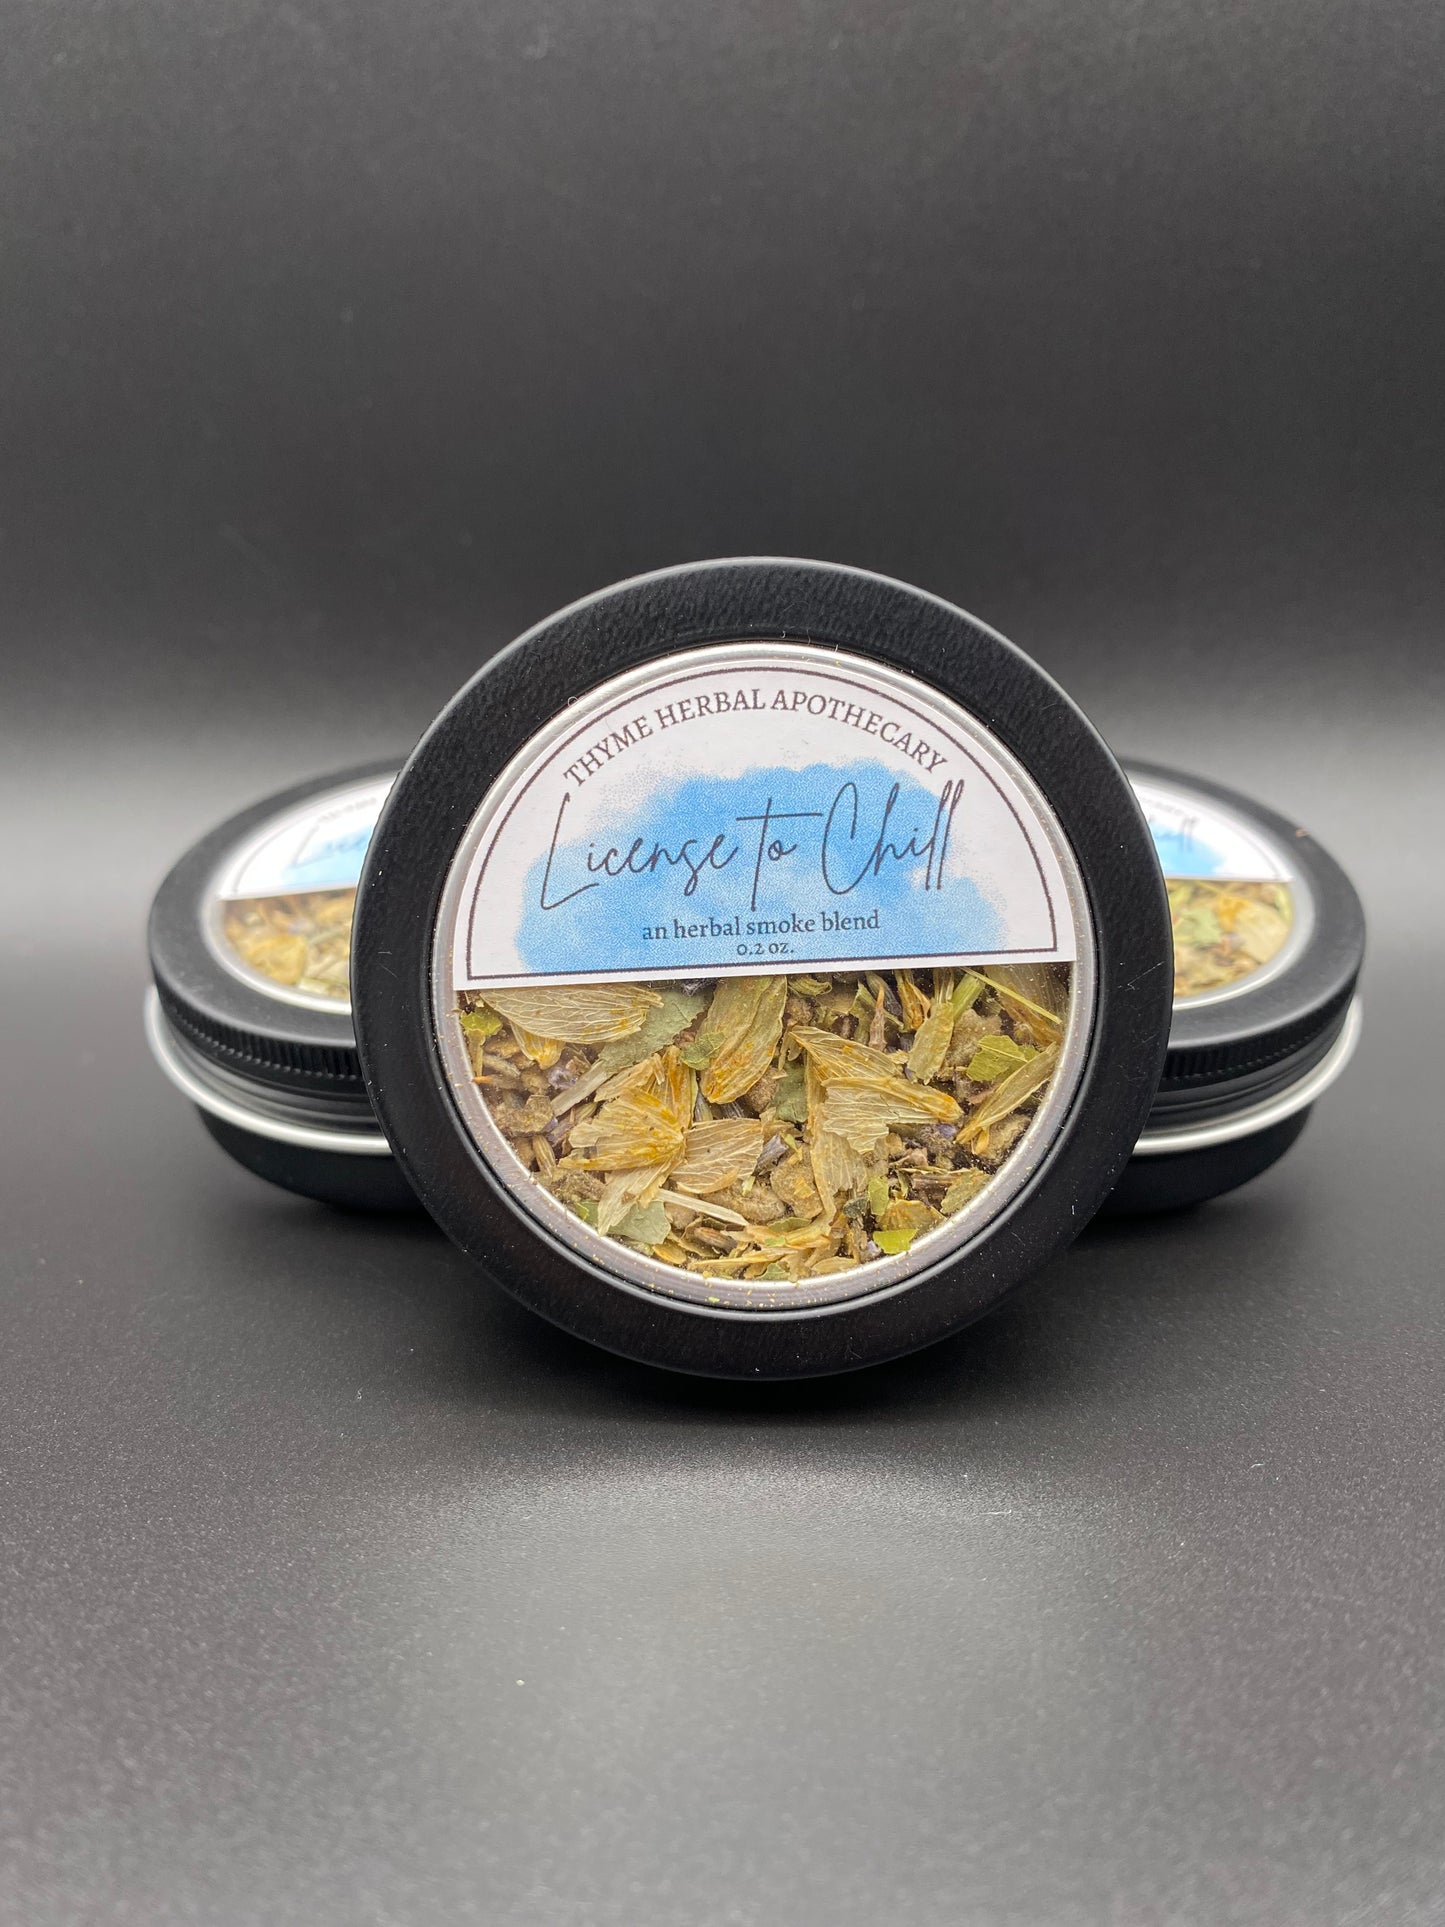 License to Chill: Herbal Smoke Blend